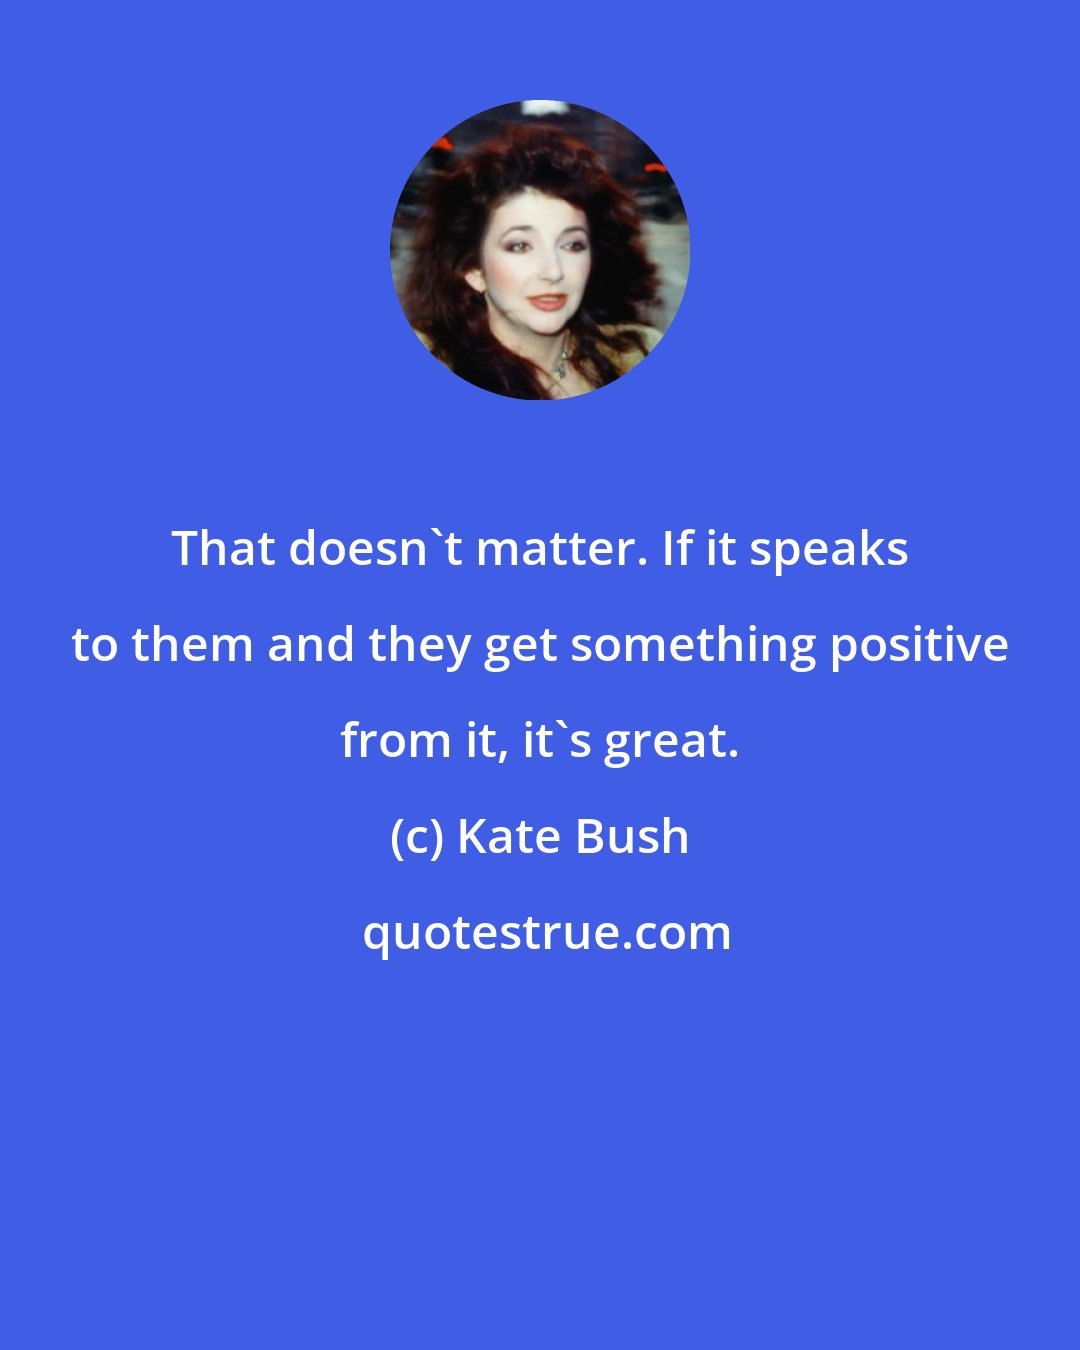 Kate Bush: That doesn't matter. If it speaks to them and they get something positive from it, it's great.